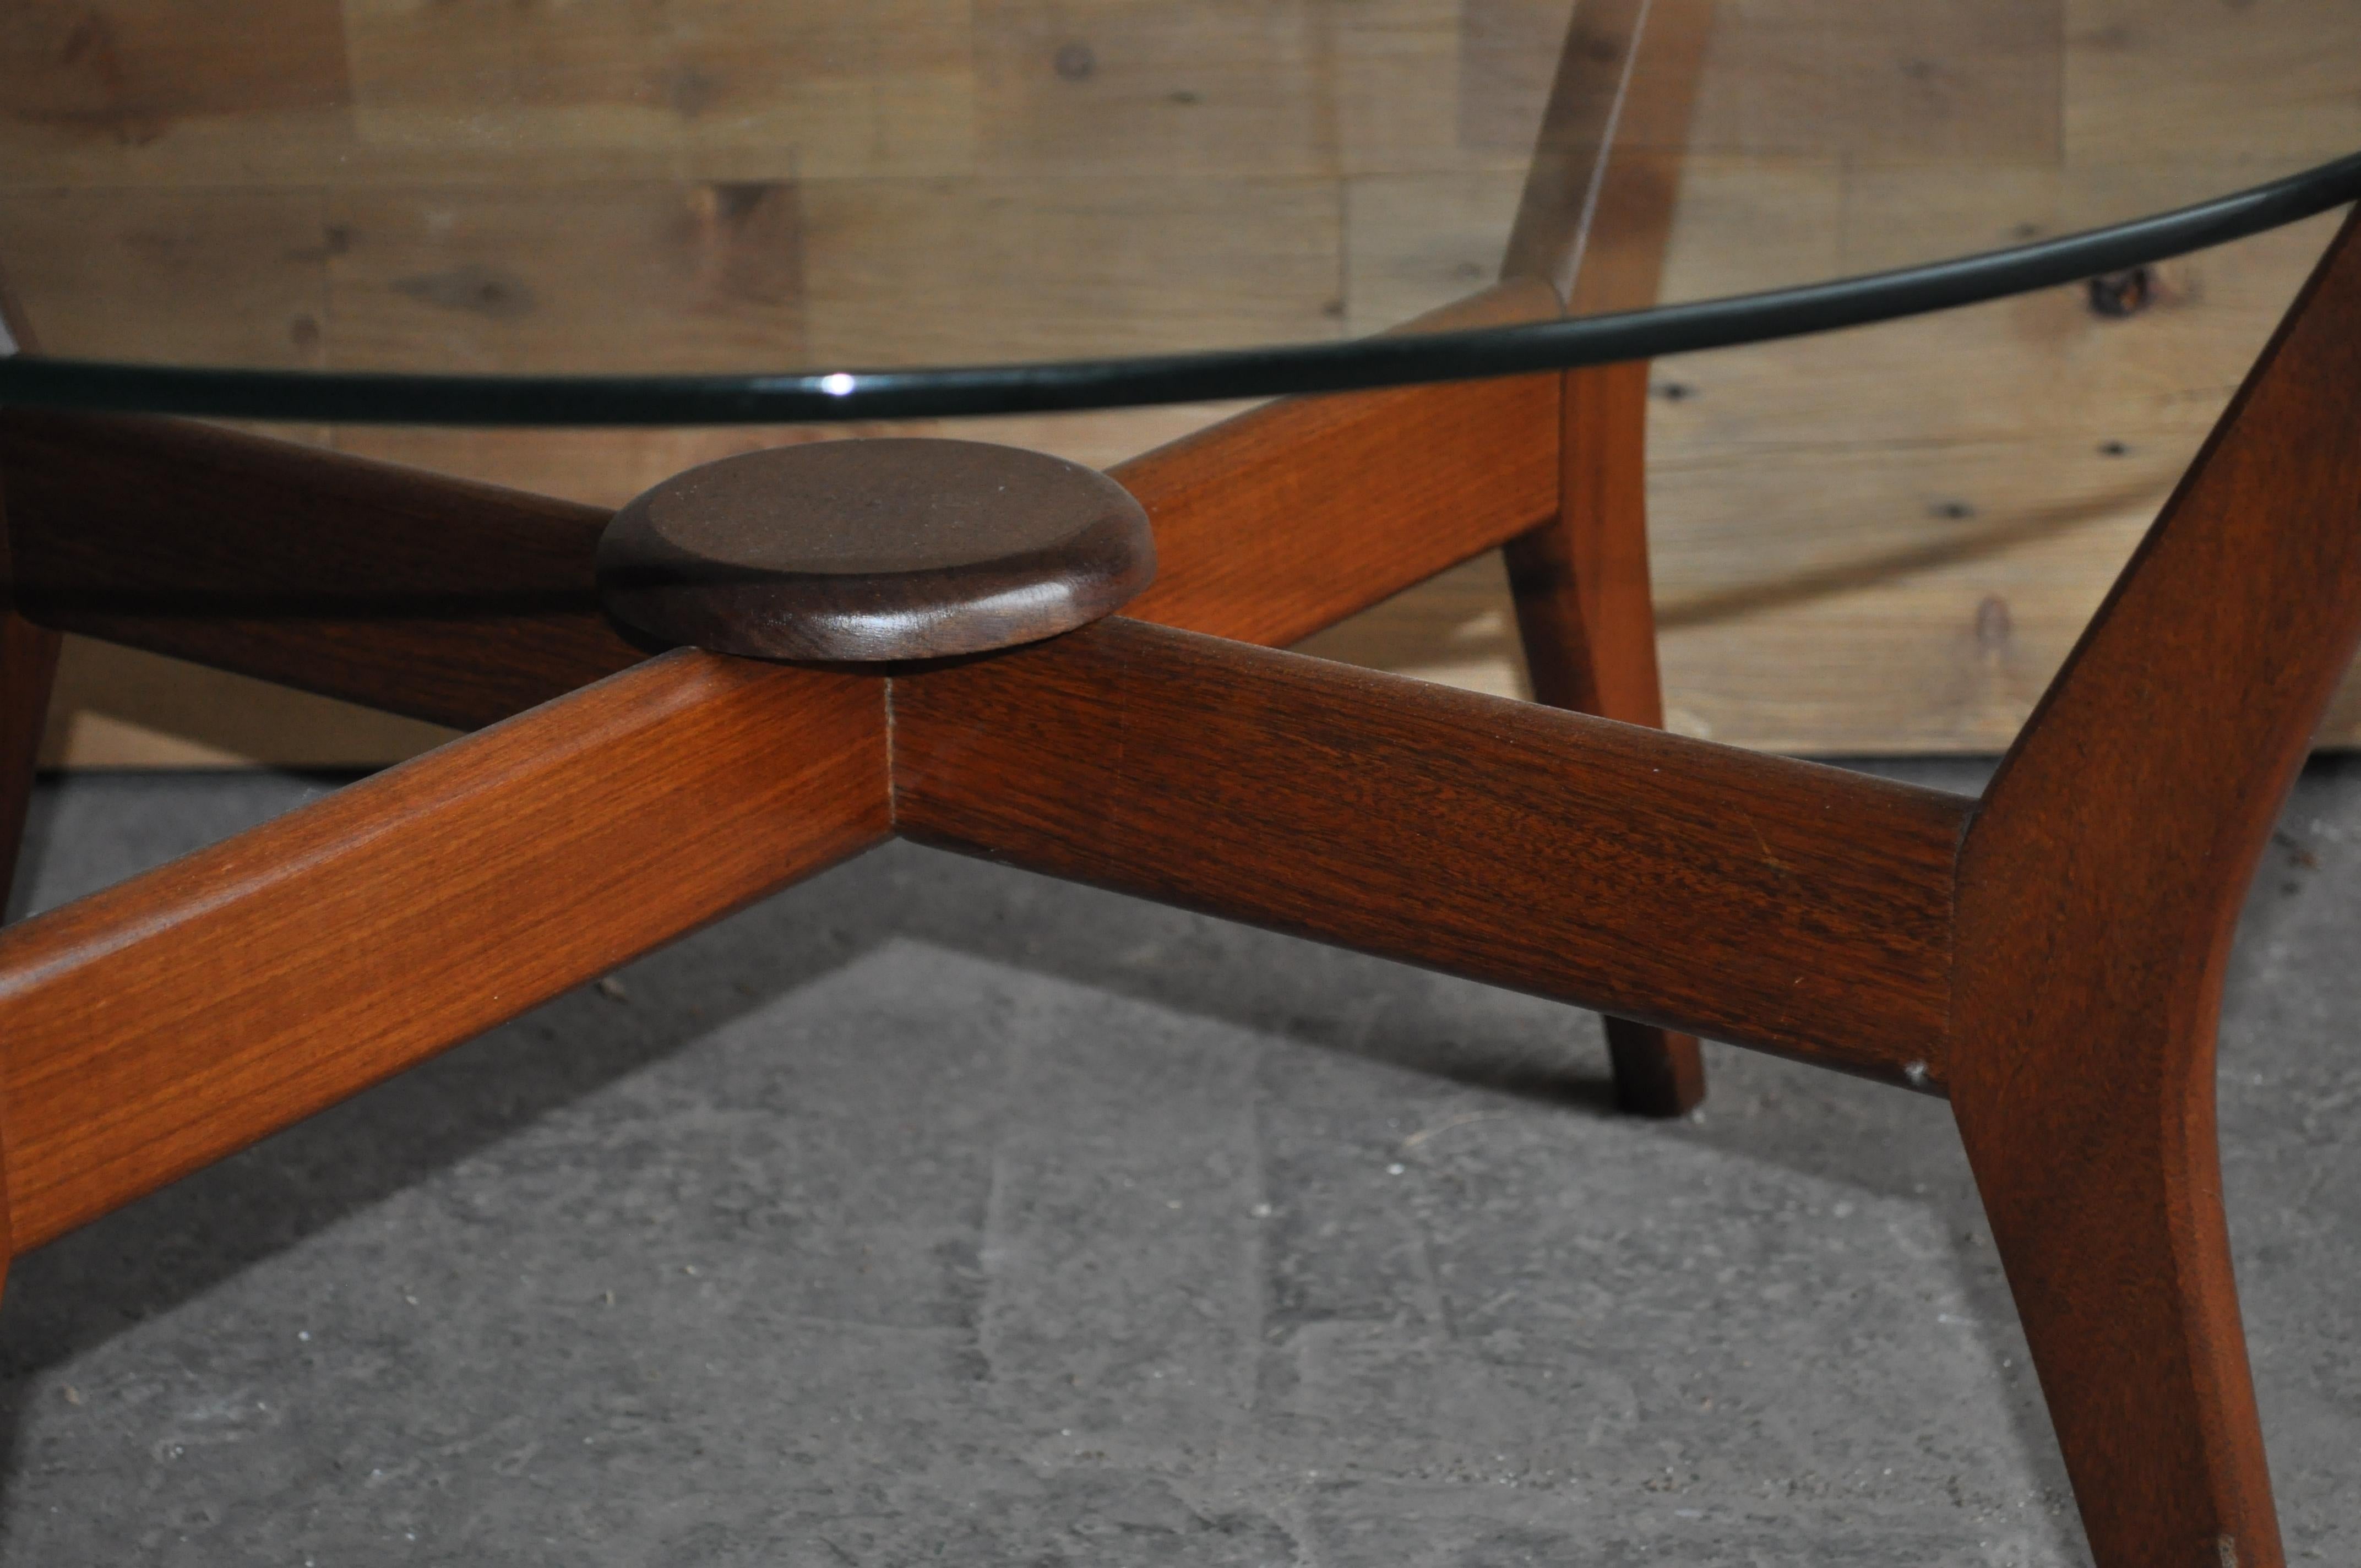 Midcentury floating coffee table.

Made with a solid Afrormosia (African teak) base
and 1/2 inch thick toughened glass floating top

Of beautiful quality and construction

Maker unknown however very Danish in style, unfortunately we 
have